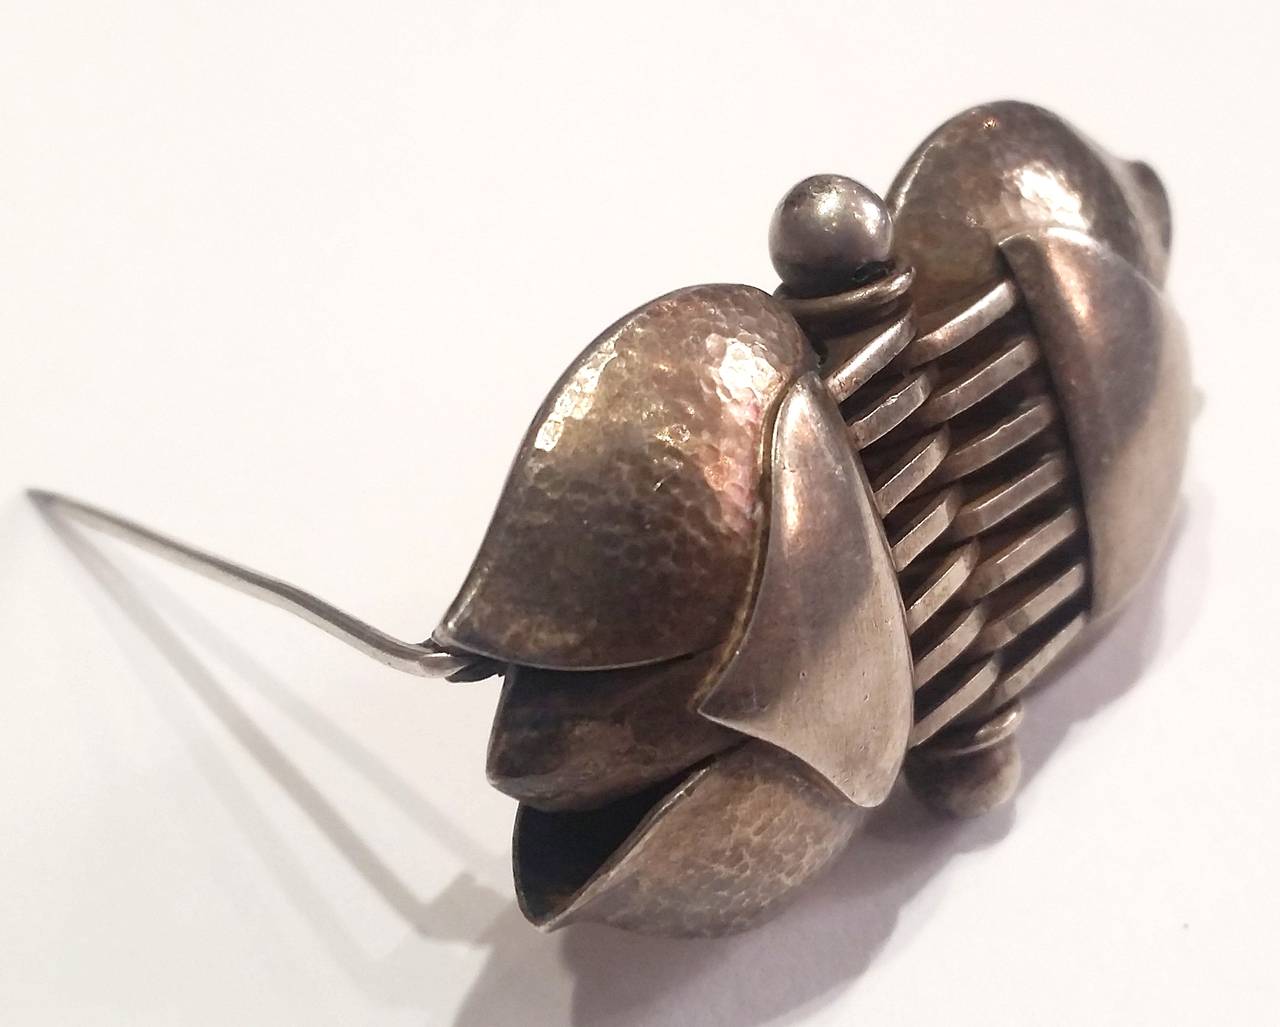 Art Decó silver brooch by very important Spanish painter and goldsmith Jaume Mercade. Tulip shape with central joint representing a hinge.

Martelé and polished silver handwork
Signed